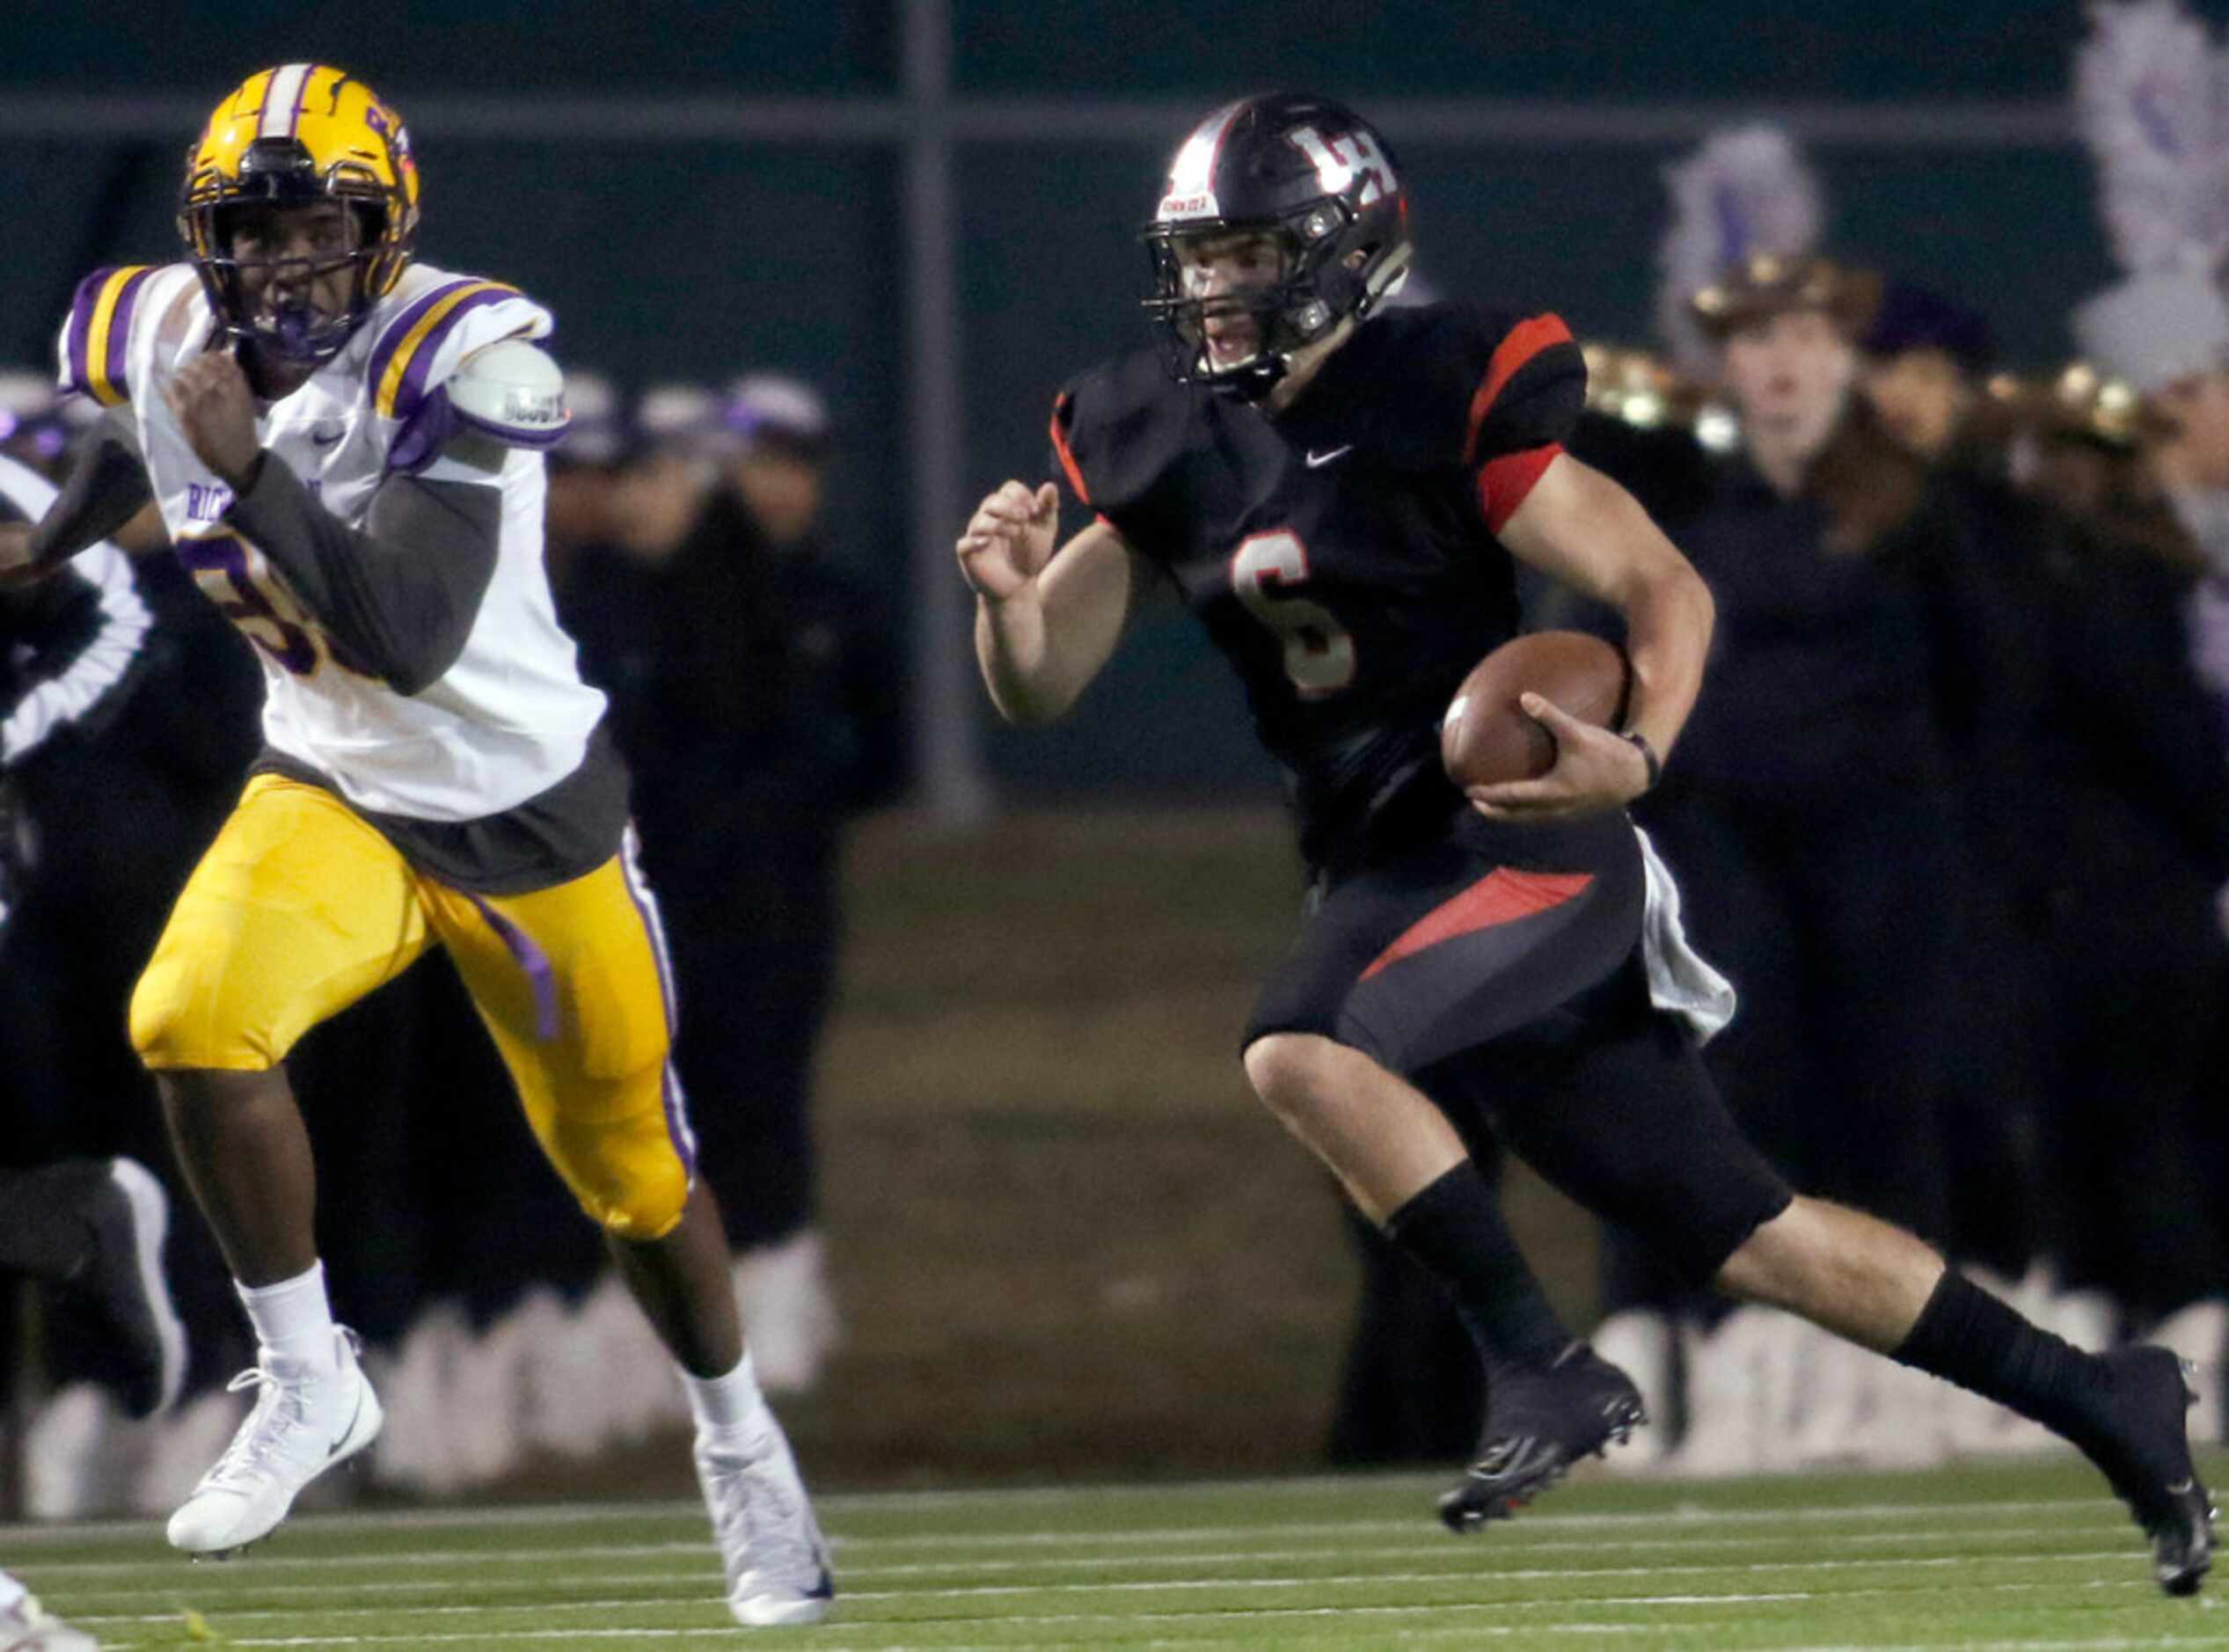 Lake Highlands quarterback Mitch Coulson (6) scampers through the Richardson secondary as...